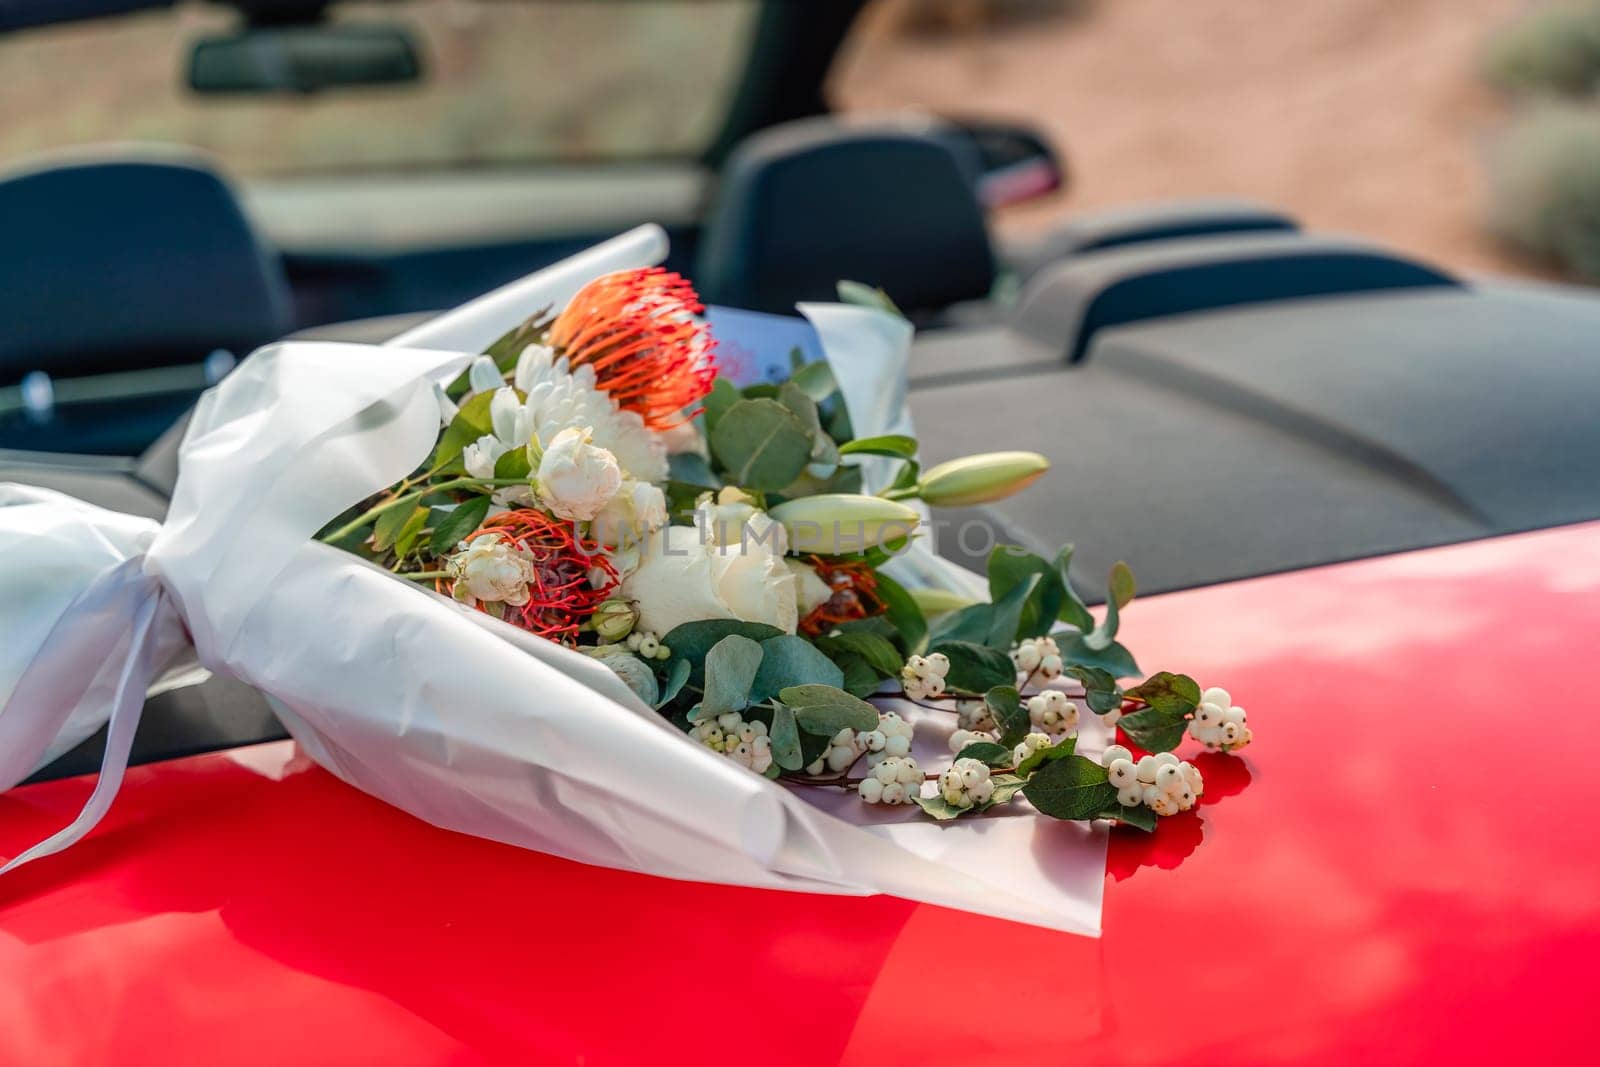 A bouquet of flowers is sitting on the hood of a red car. The flowers are white and red, and they are arranged in a vase. Concept of romance and love